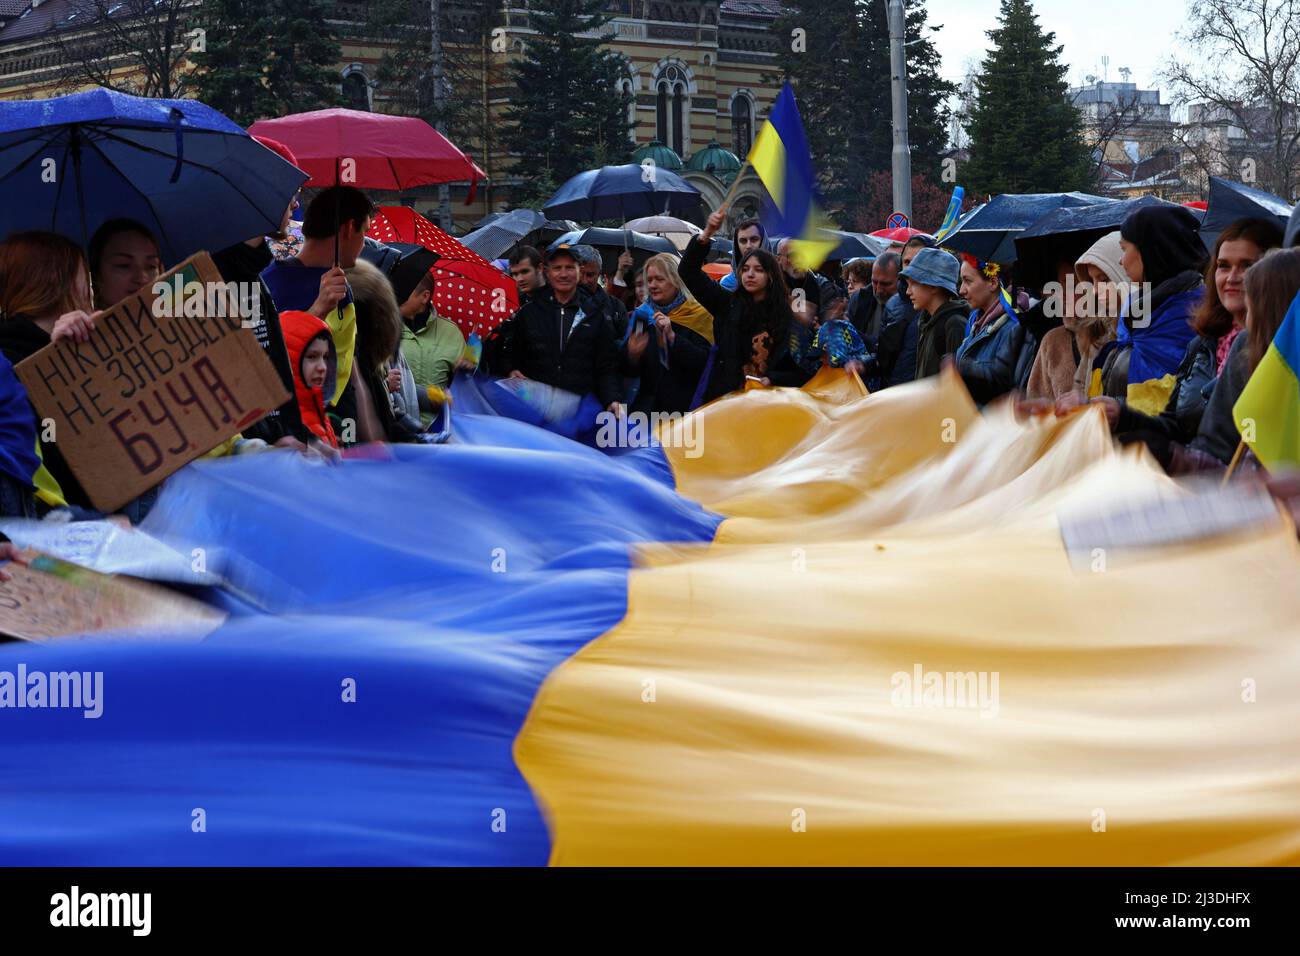 Sofia, Bulgaria - 7 April, 2022: People demonstrate holding Ukraine's national flag during a march in support of Ukraine. On 24th of February Russian army entered Ukrainian territory in what the Russian president Vladimir Putin declared a 'special military operation'. Stock Photo